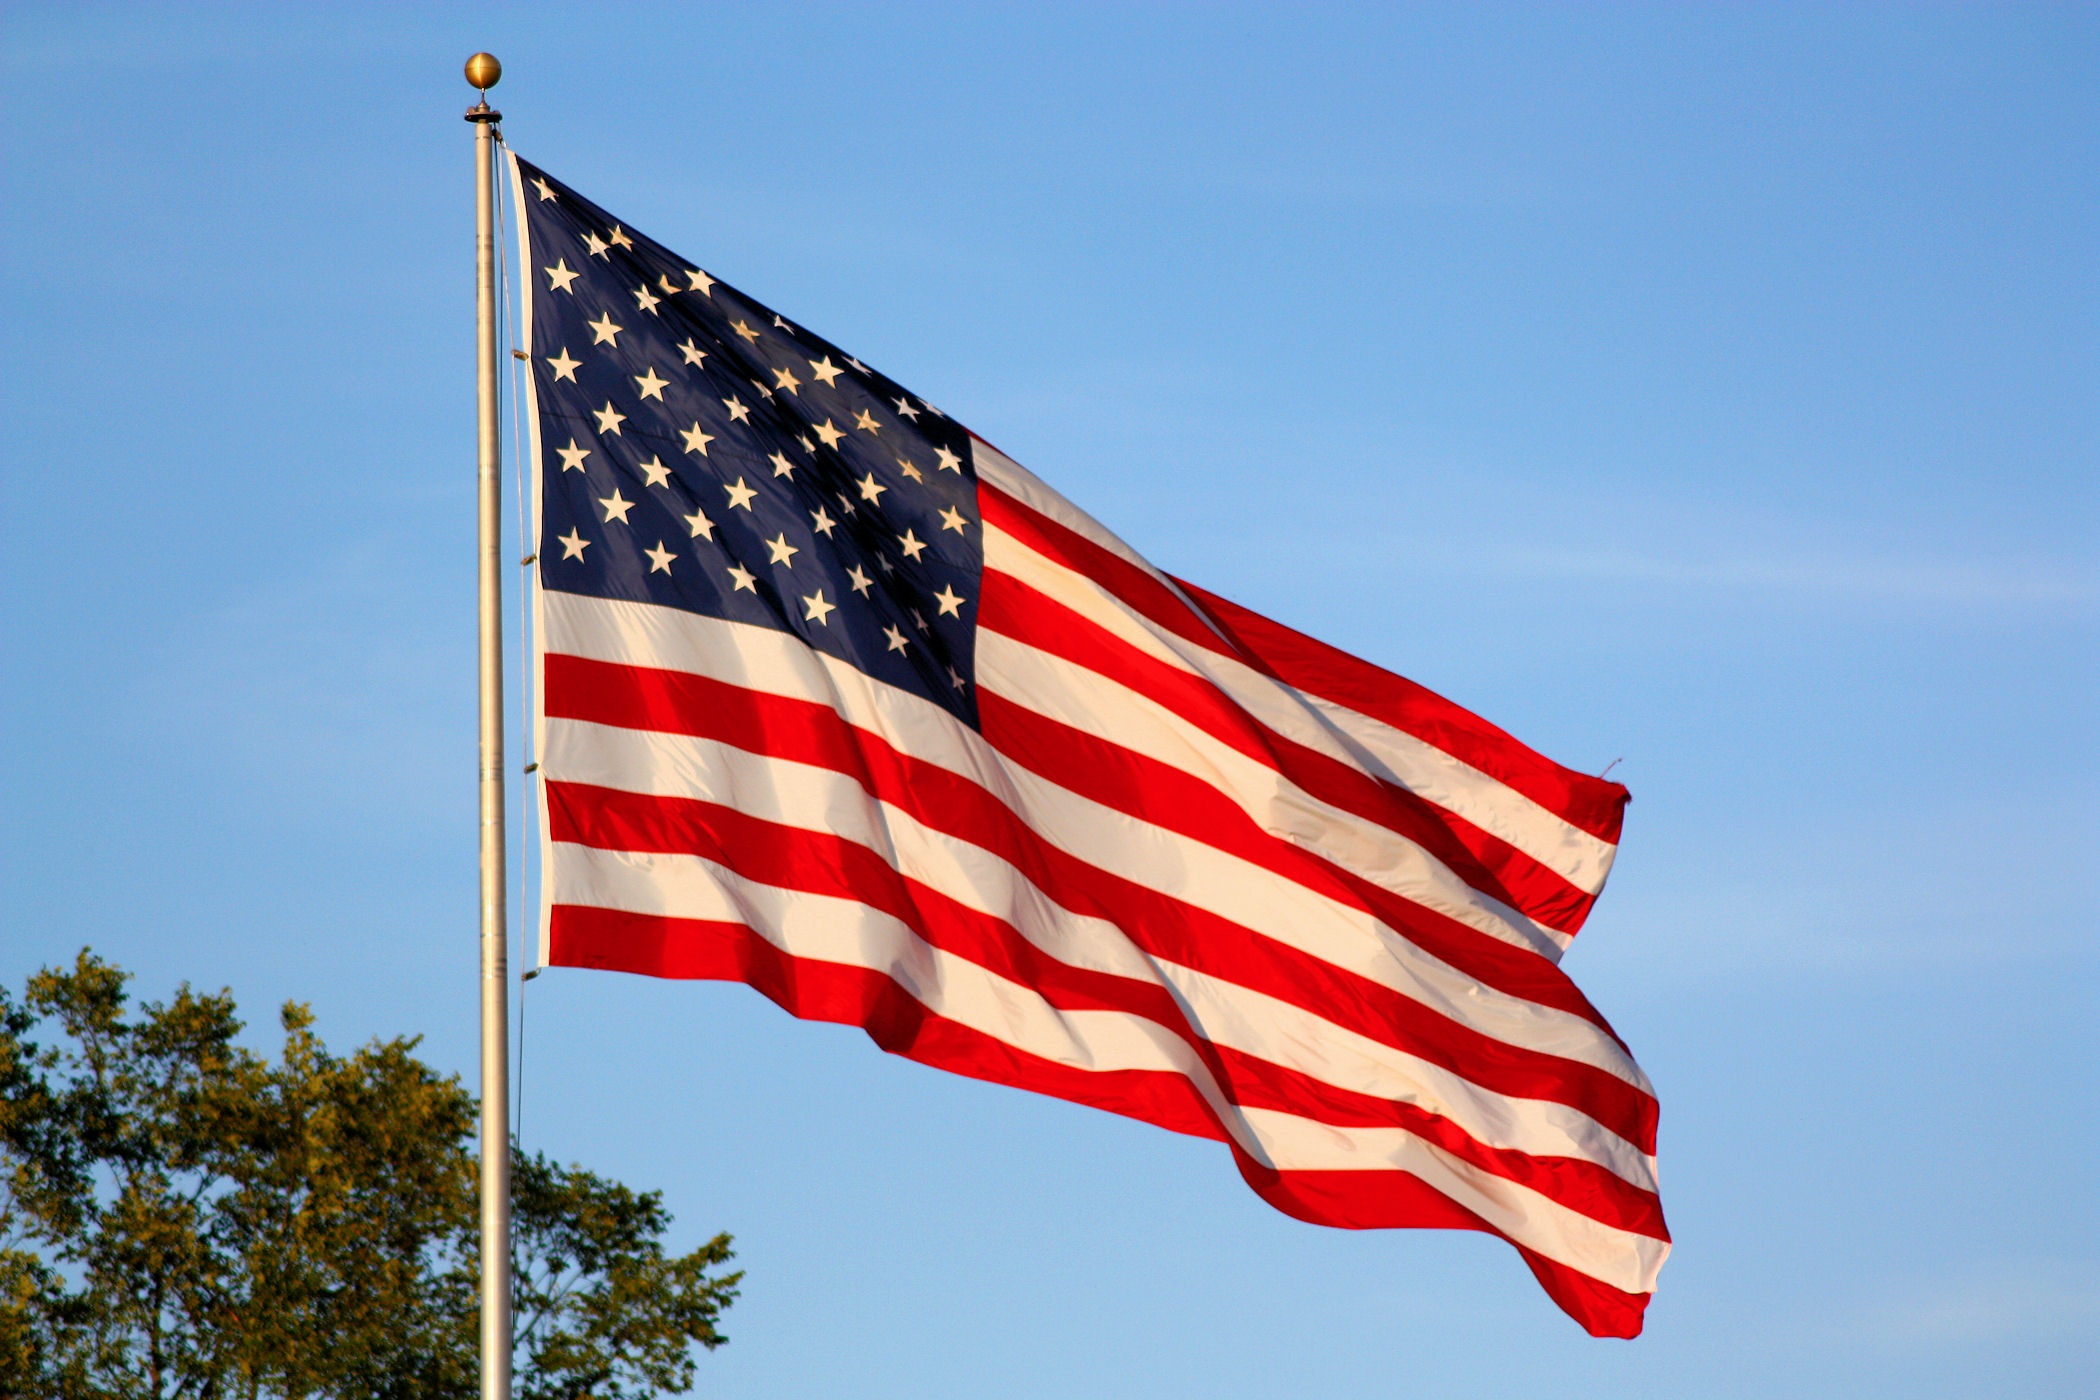 red-flag-american-flag-stars-and-stripes-waving-flag-flag-of-the-united-states-851317